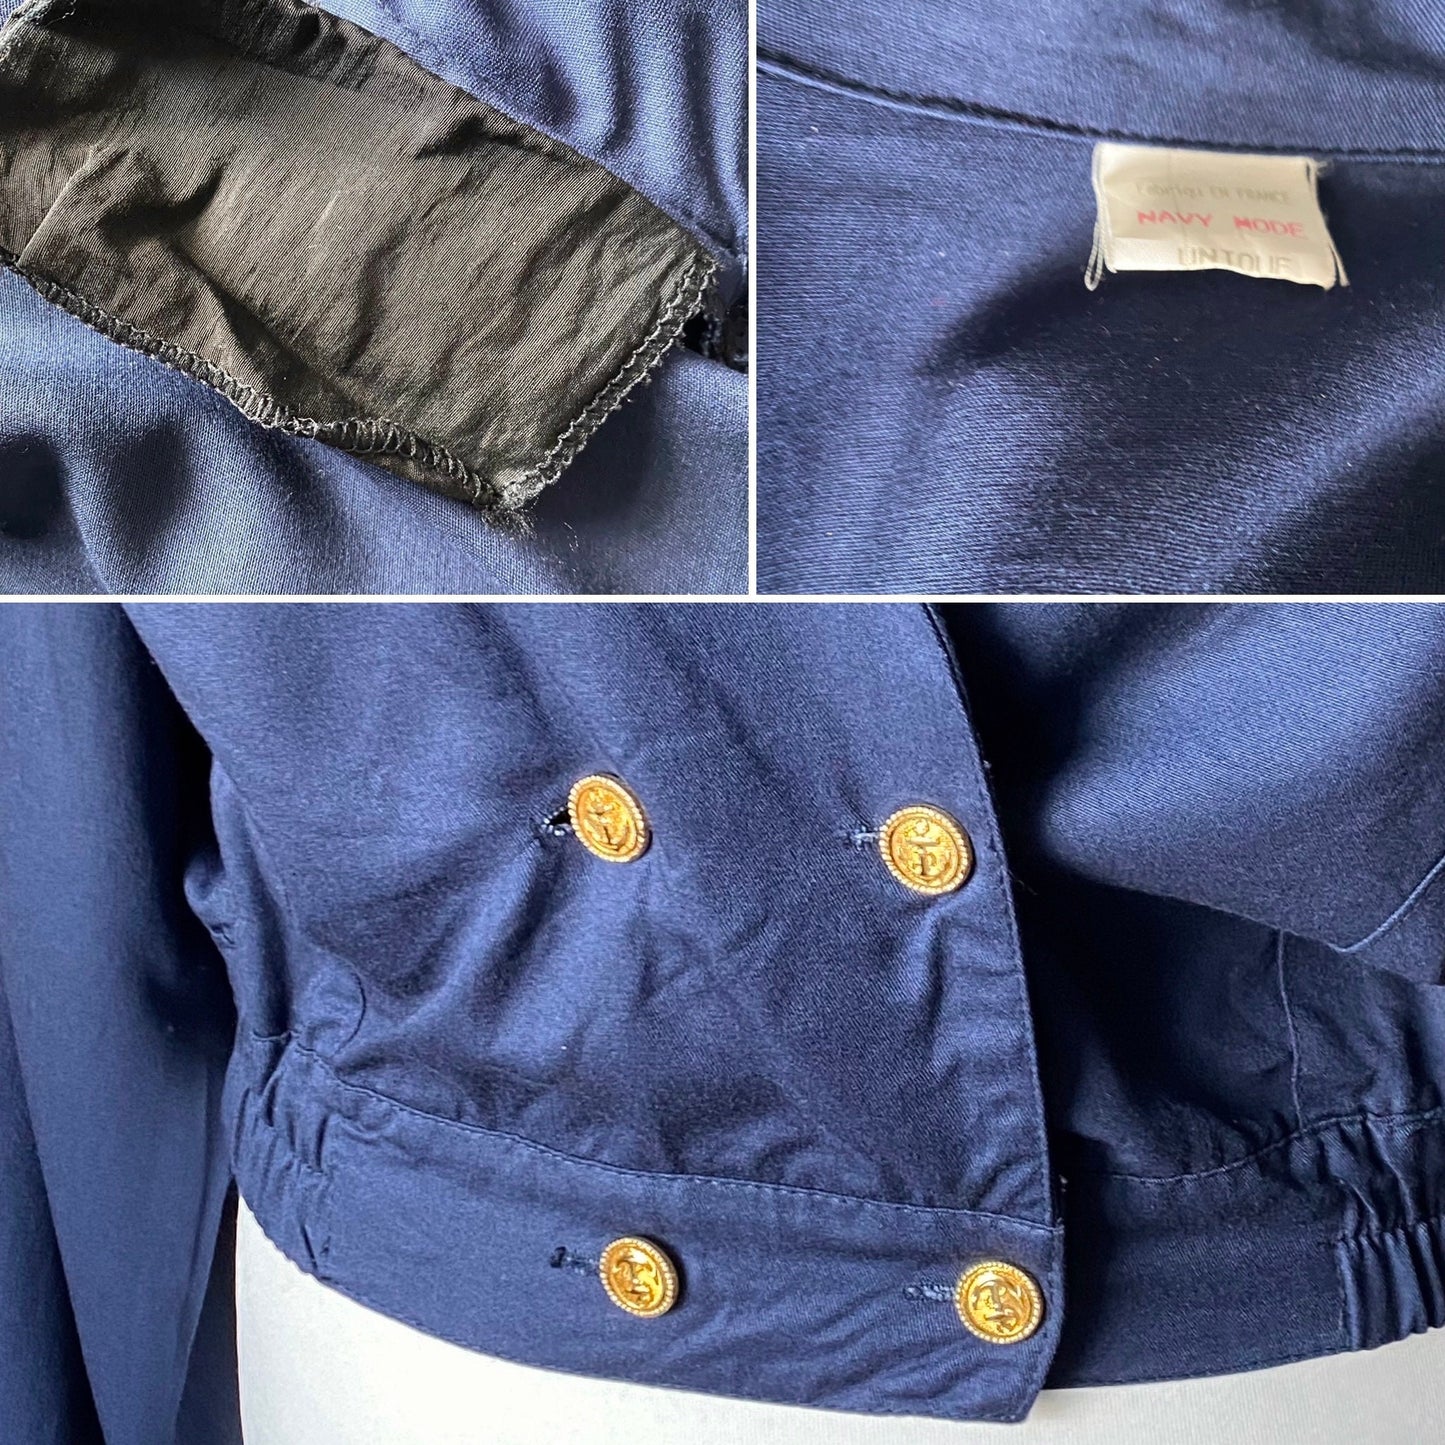 80s blue sailor style jacket with military style detailing. Approx UK size 16-18